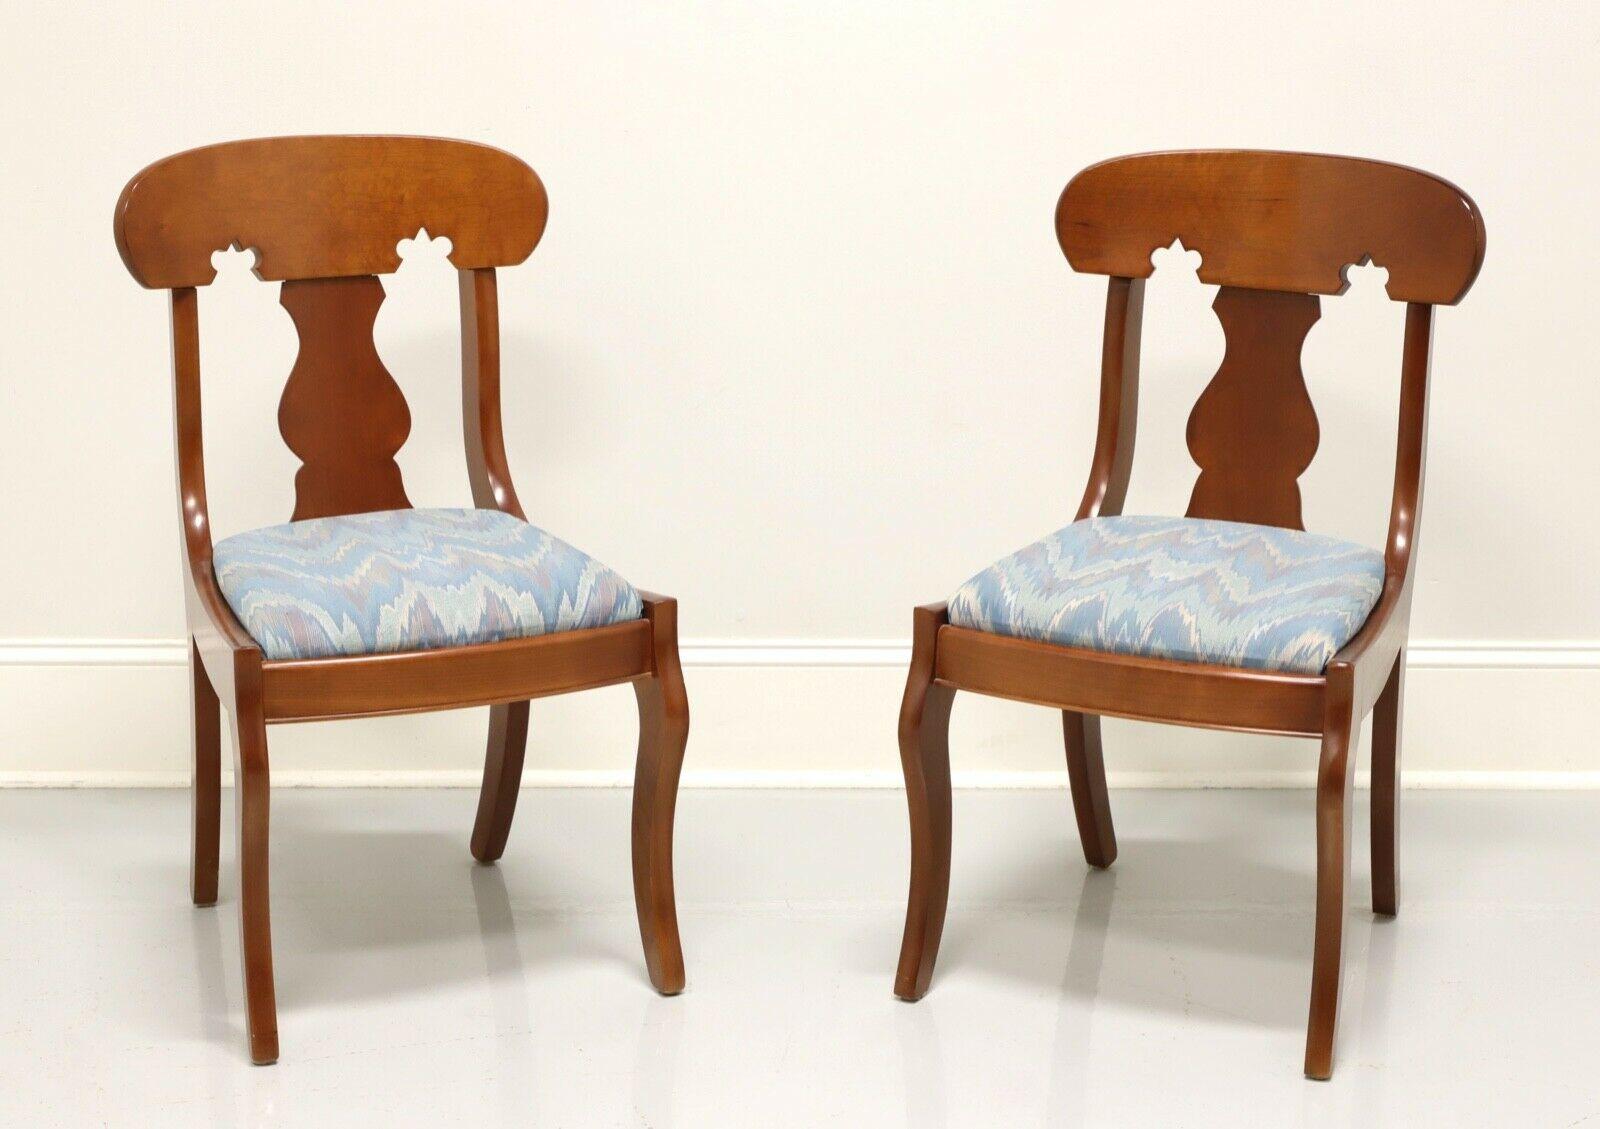 CASSADY Solid Cherry Empire Style Dining Side Chairs - Pair A 5